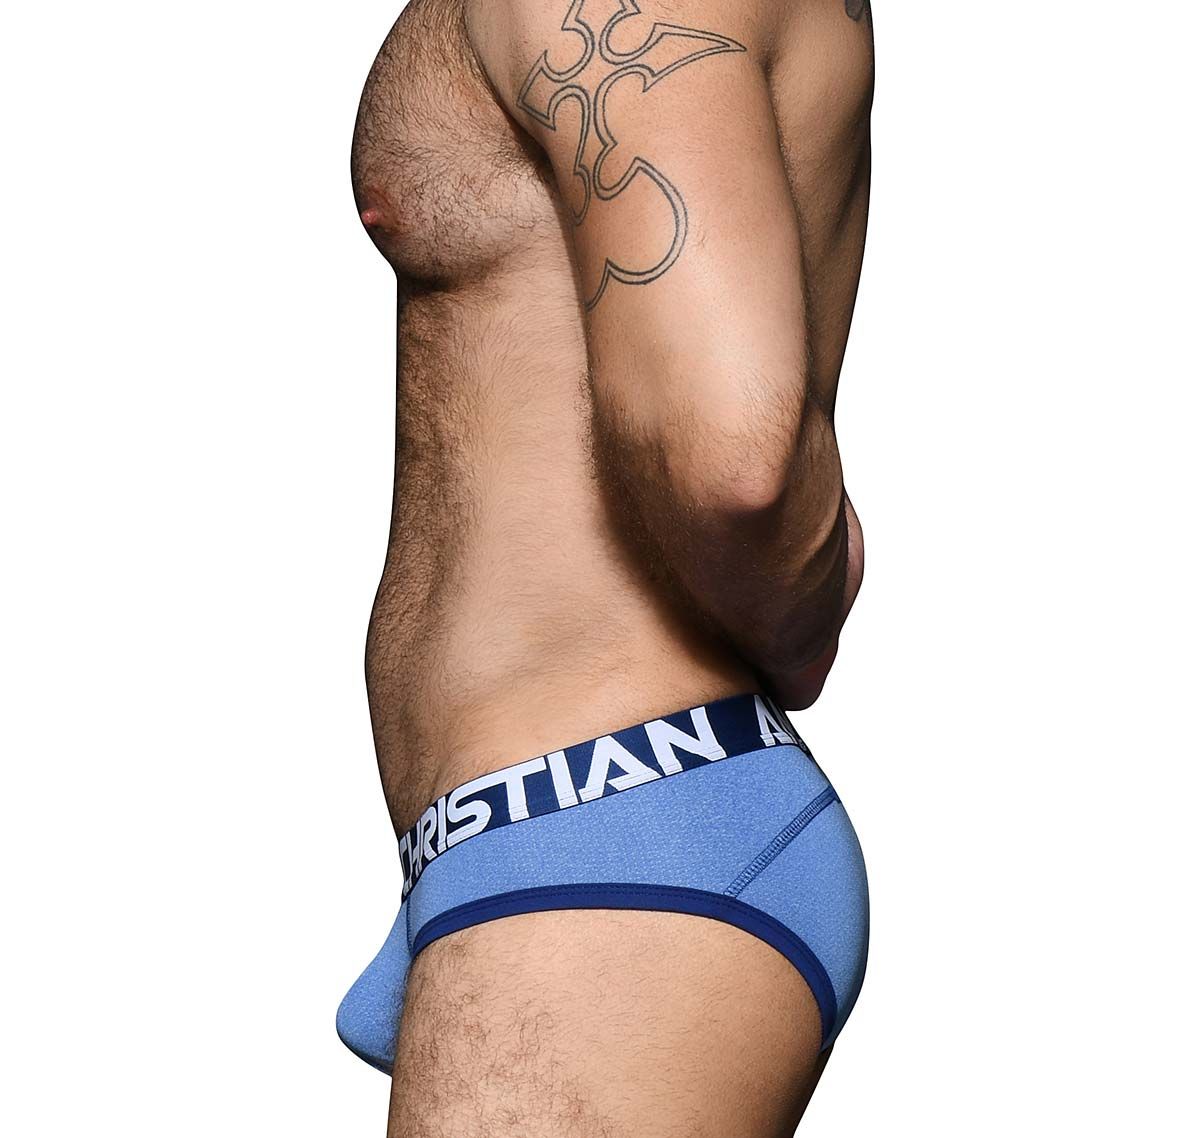 Andrew Christian Brief ACTIVE SPORTS BRIEF 92697, blue